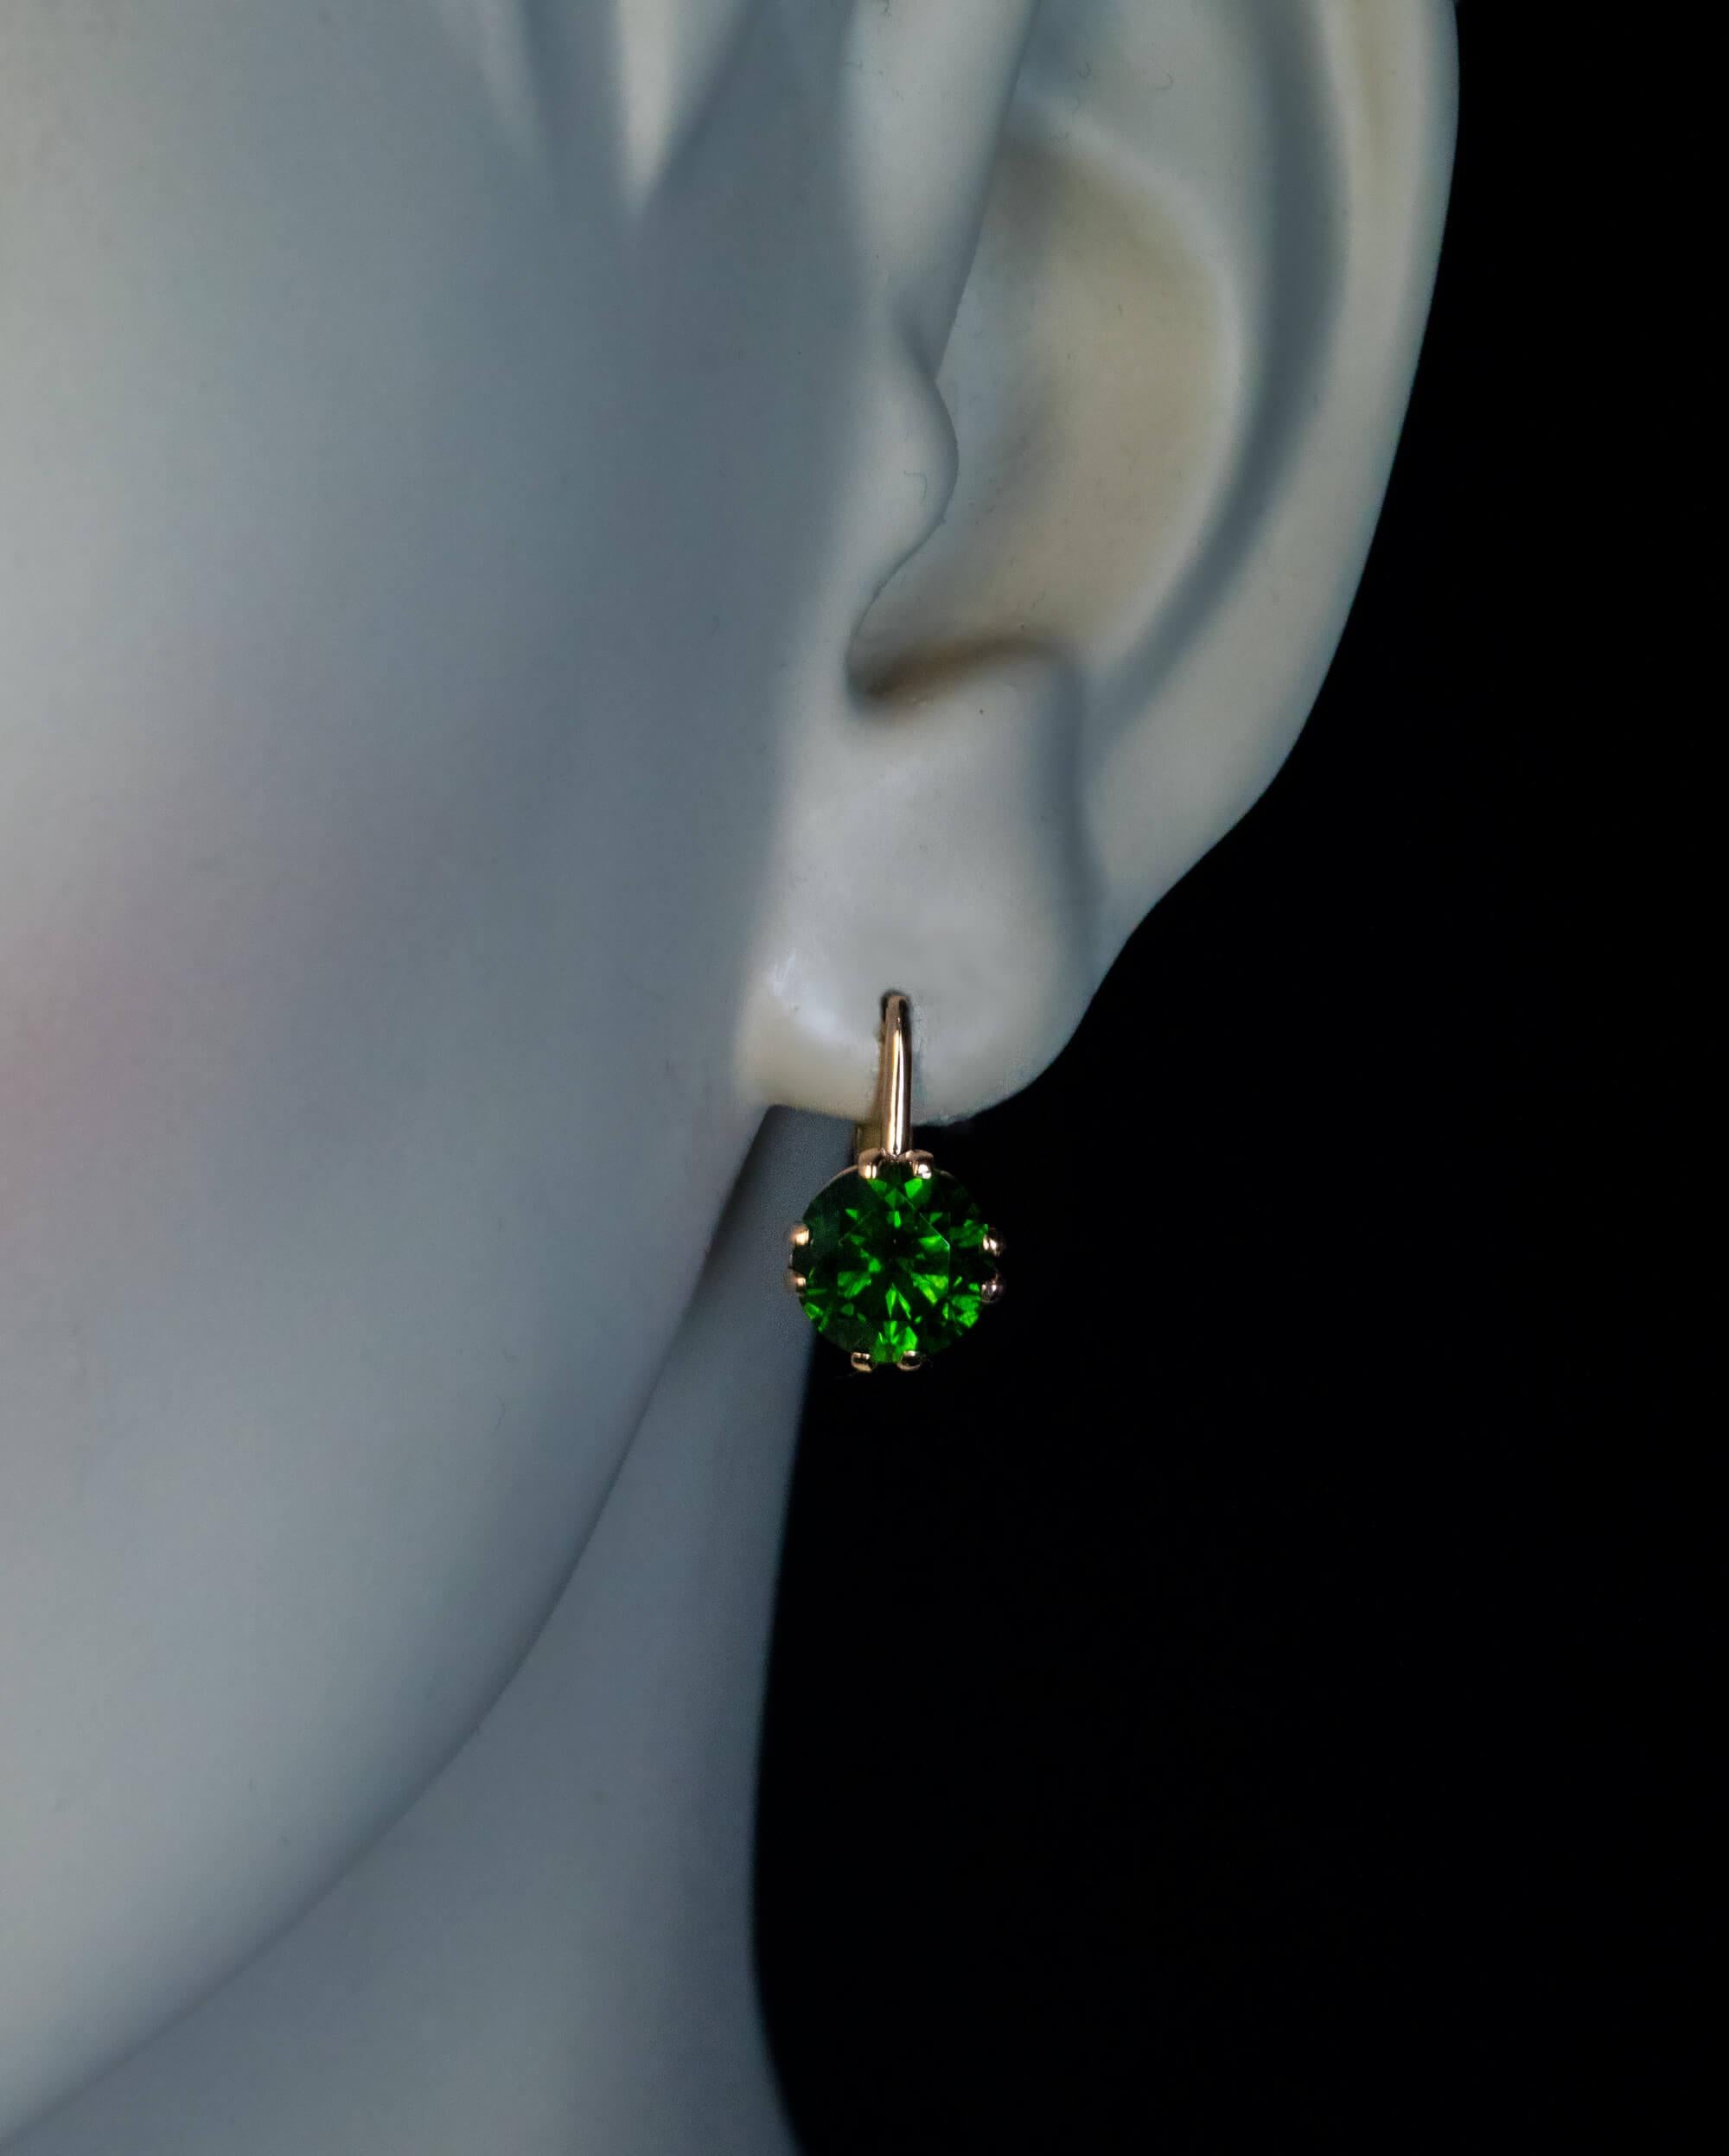 circa 1970s

These Soviet era 14K gold earrings feature two perfectly matched brilliant cut 2.23 ct and 2.23 ct Russian demantoids of dark green color. Both demantoids have fine “horsetail” inclusions which are typical for demantoids from the Ural